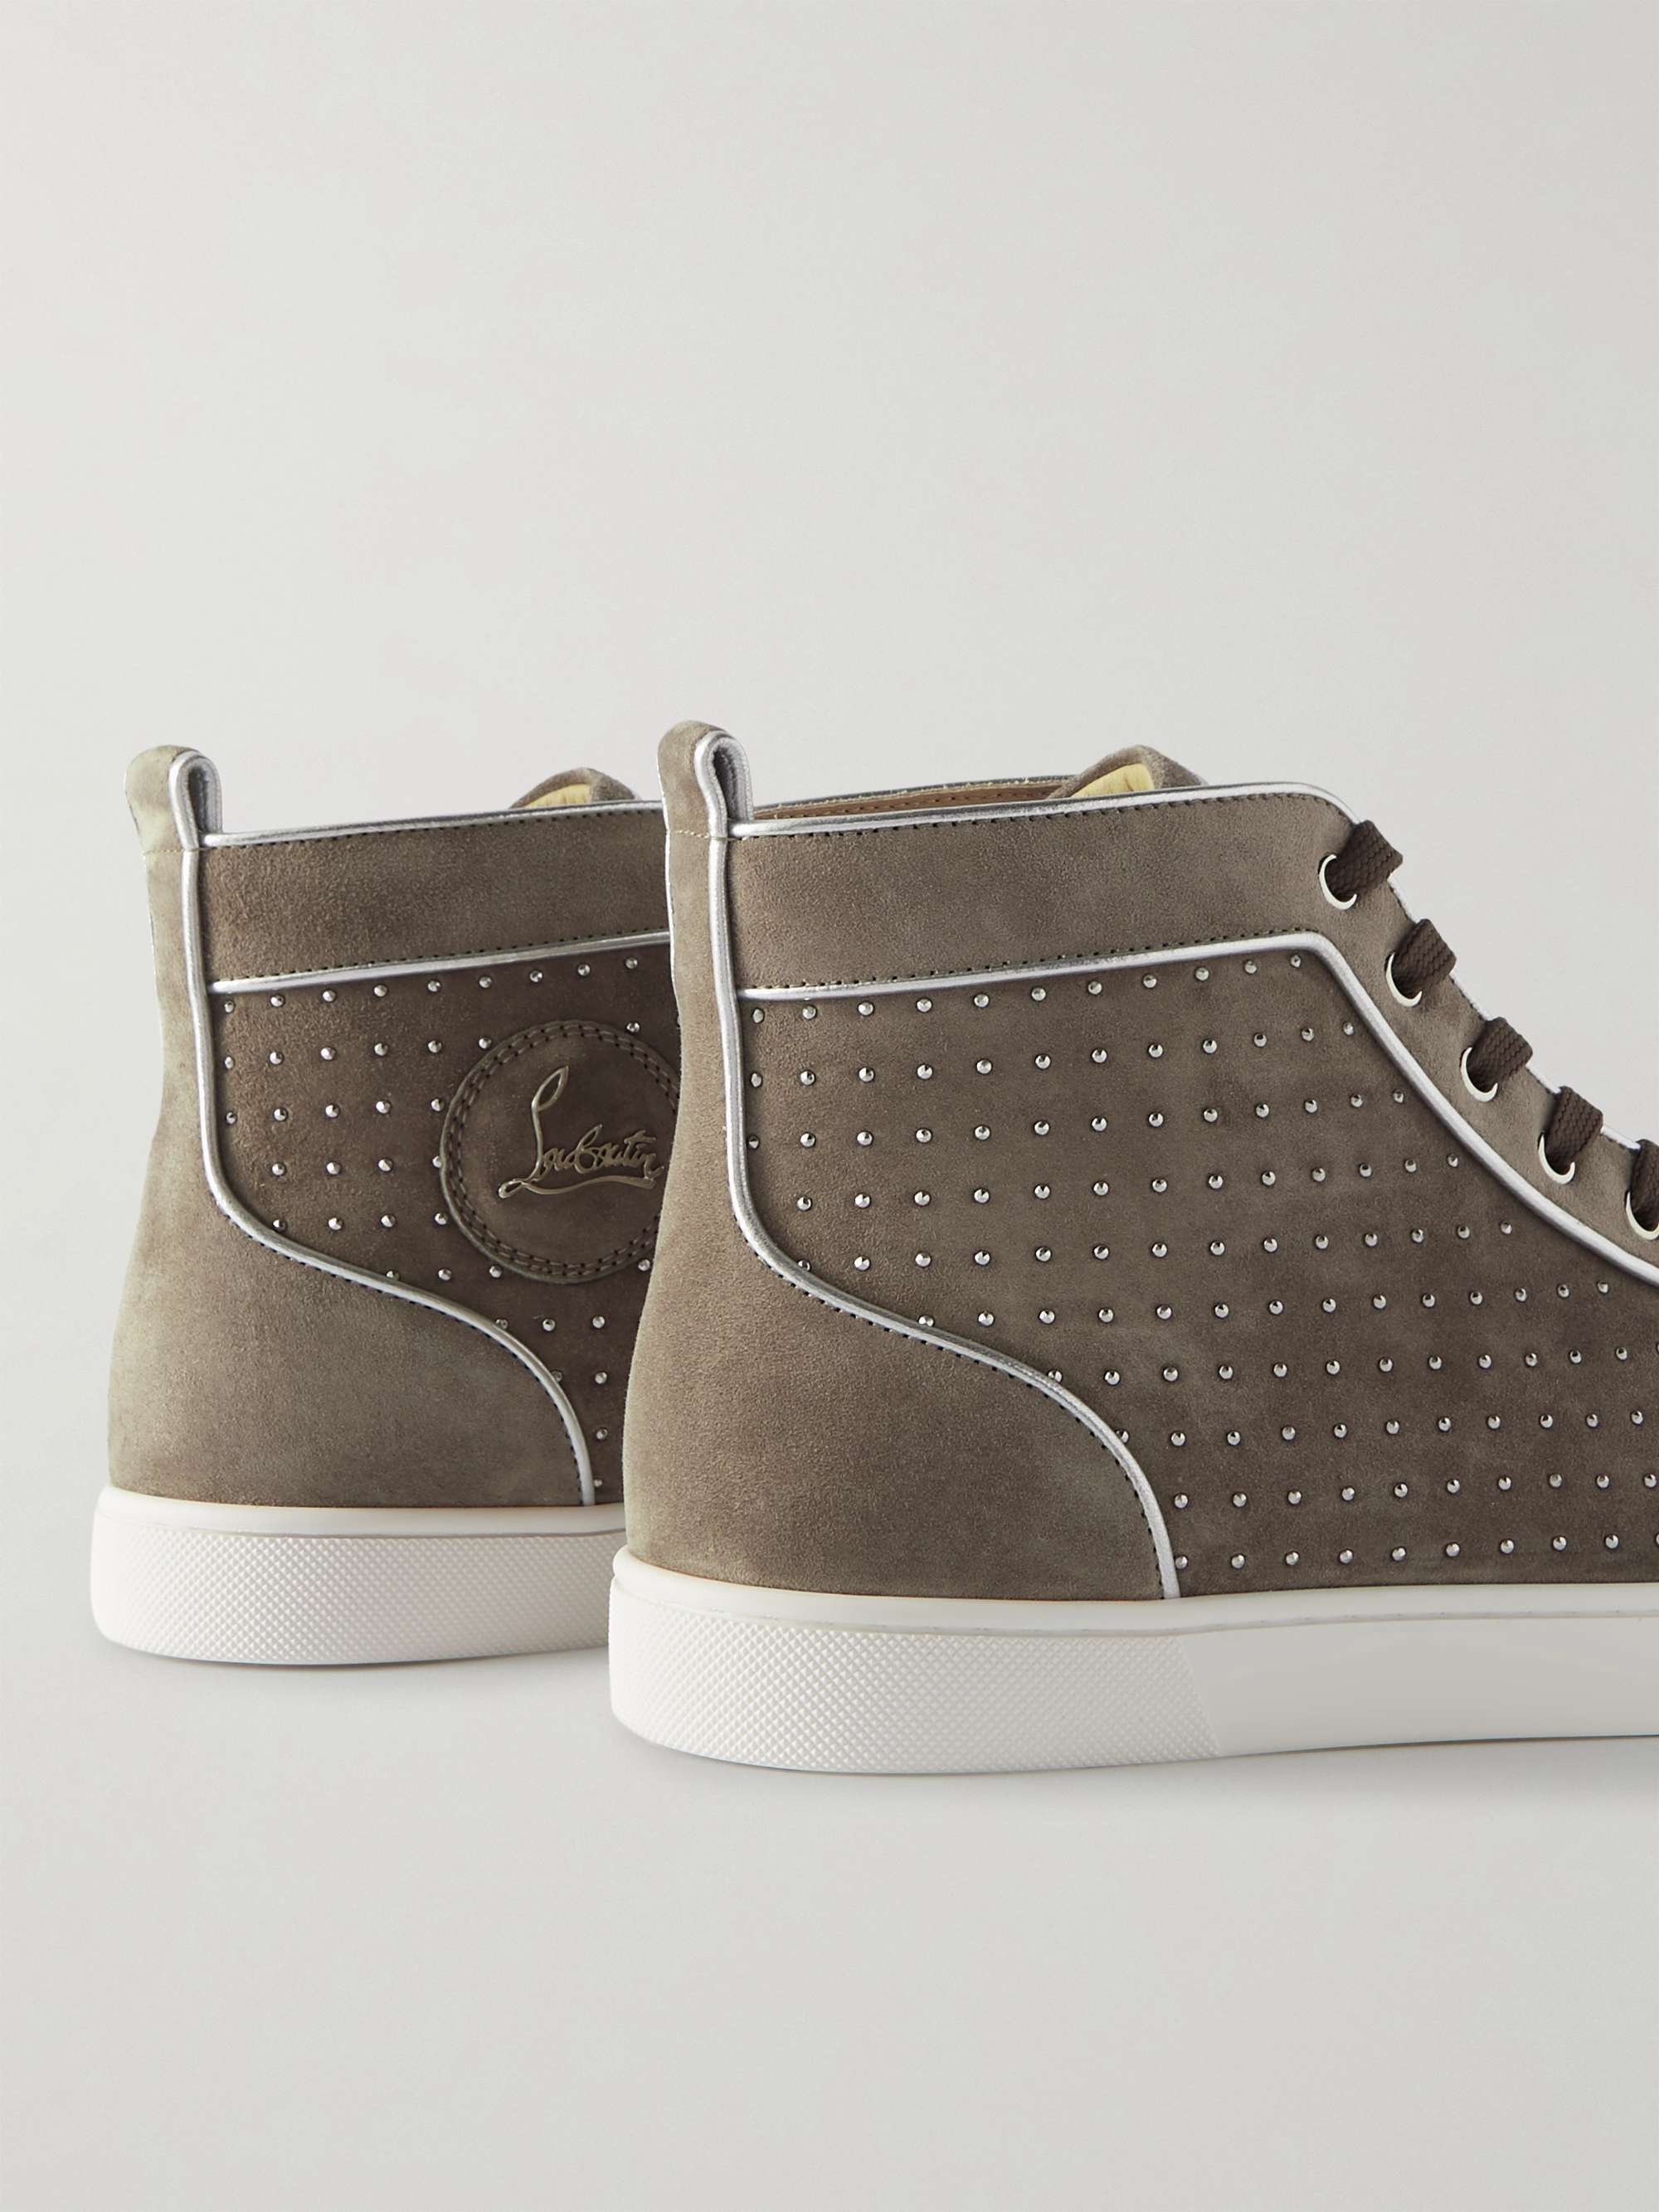 CHRISTIAN LOUBOUTIN Louis Plume Leather-Trimmed Studded Suede High-Top Sneakers